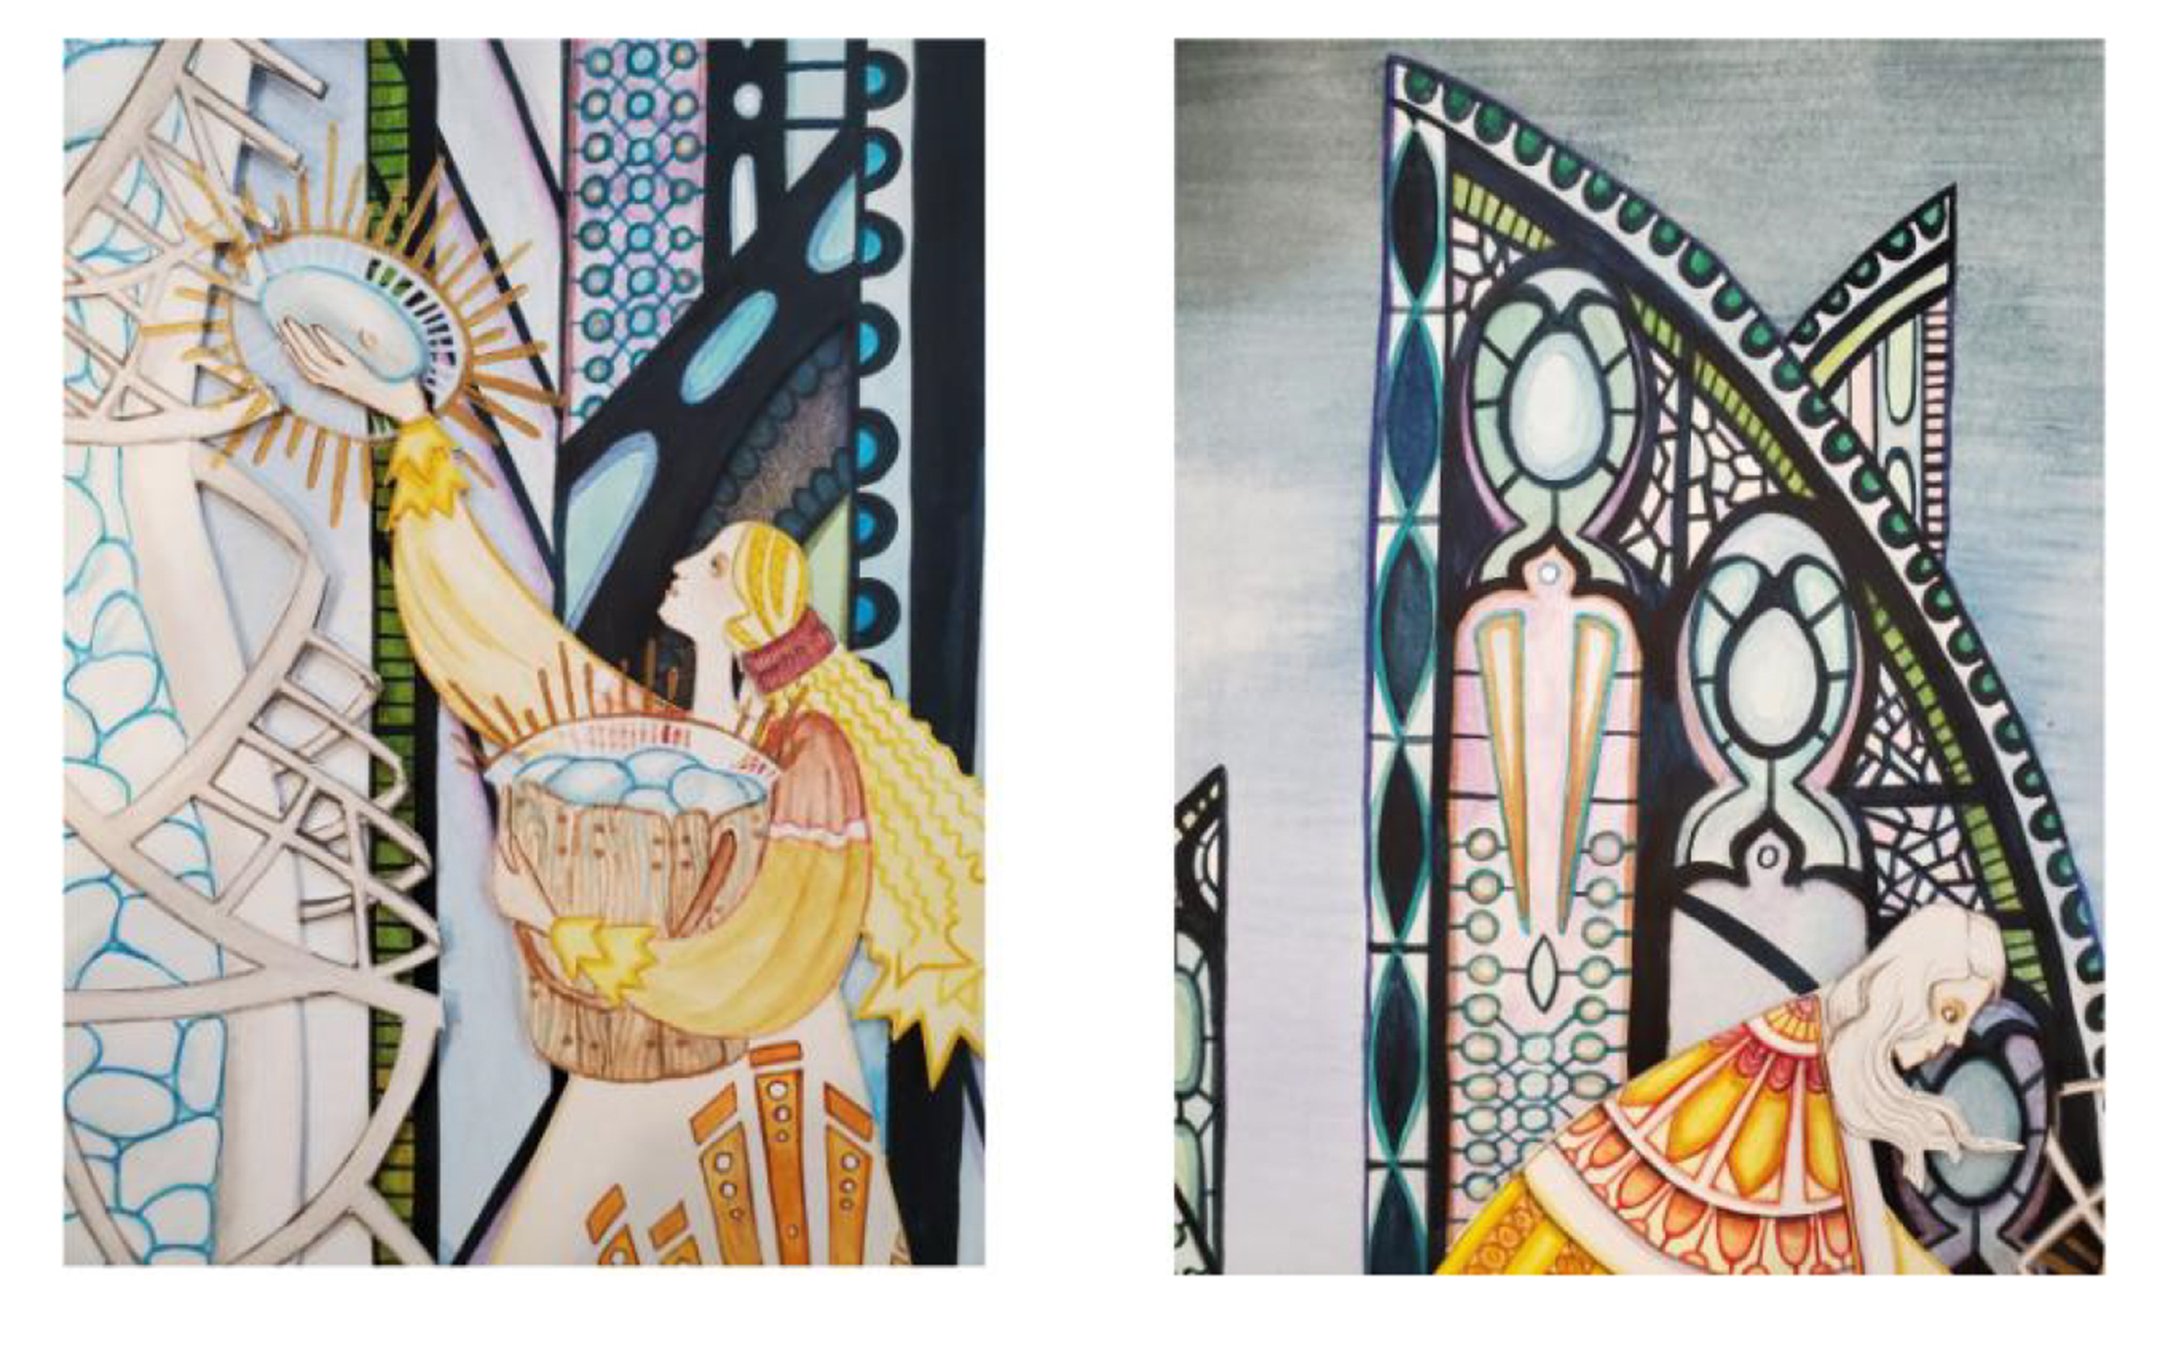 Two process drawings of the stained-glass-like illustration